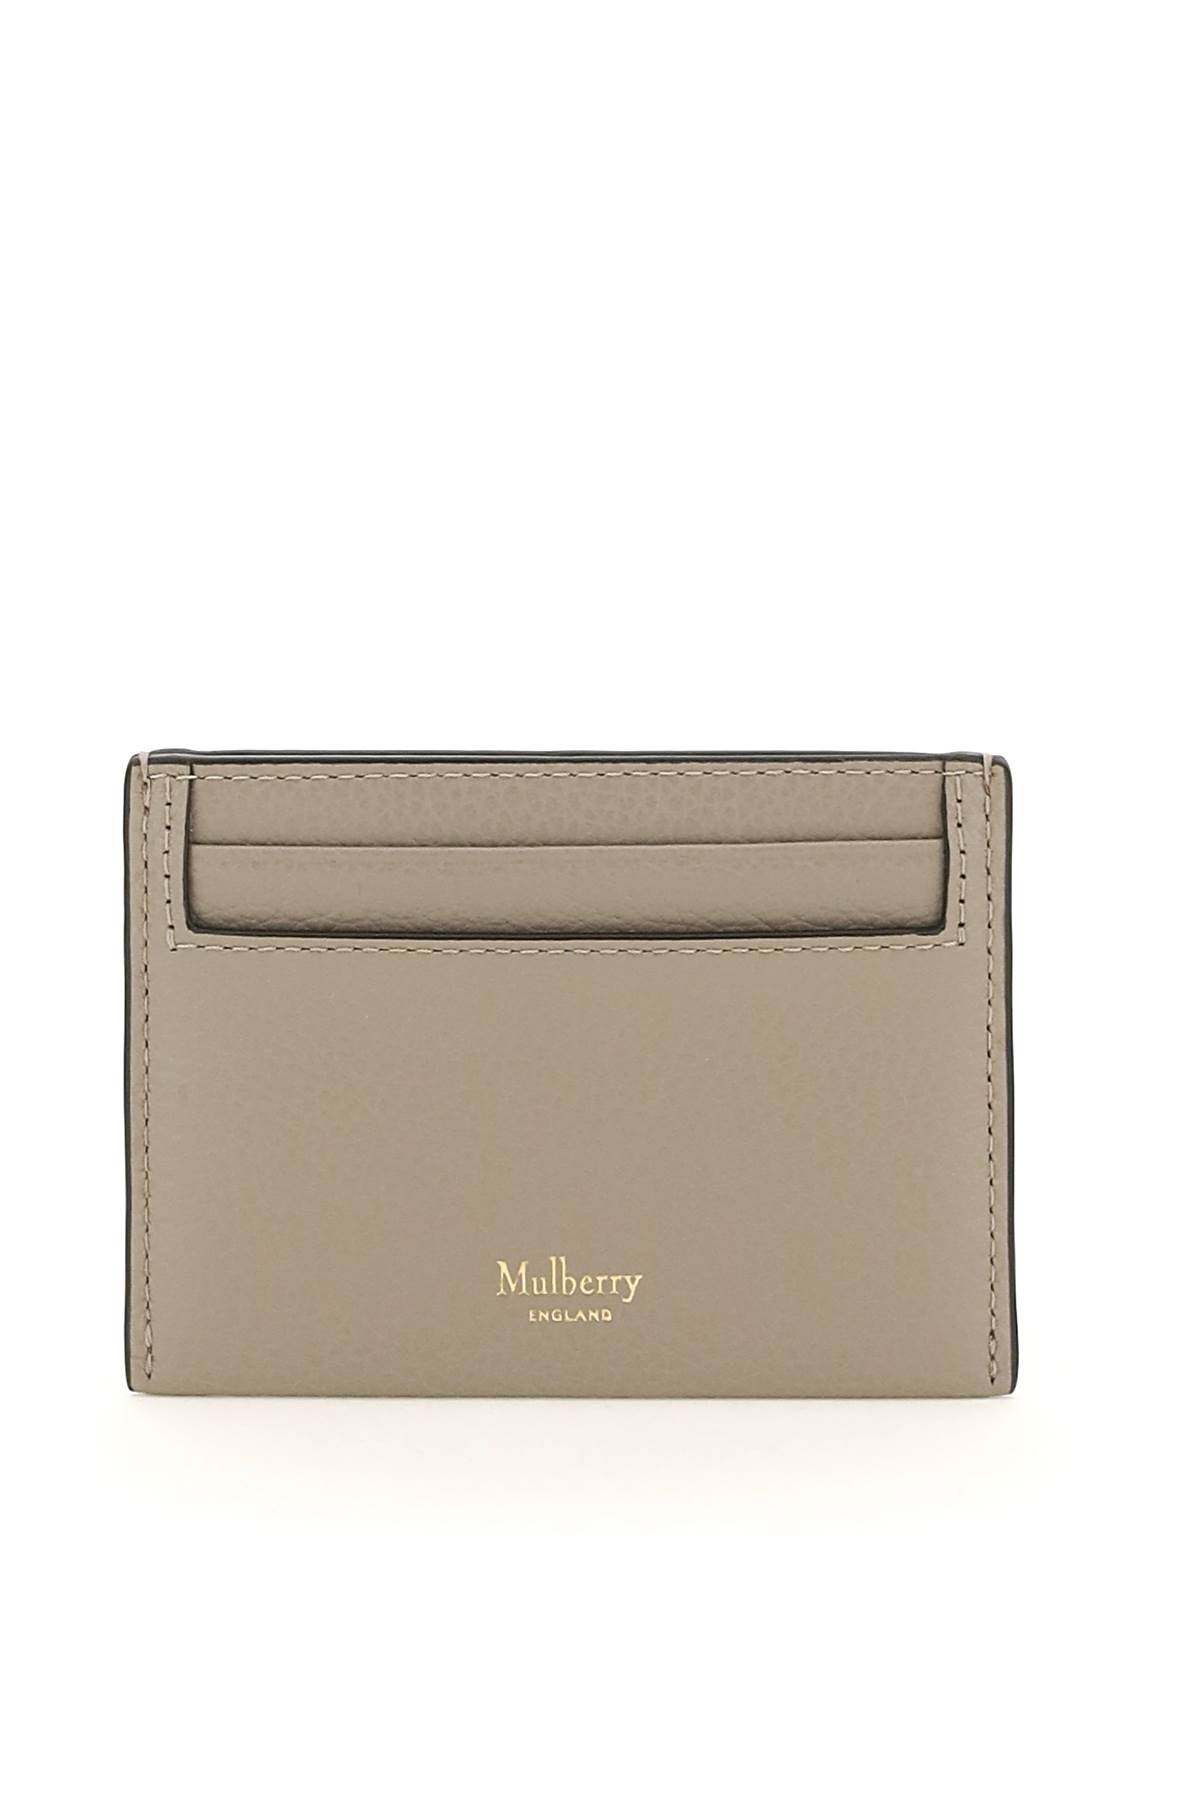 MULBERRY CONTINENTAL CARD HOLDER